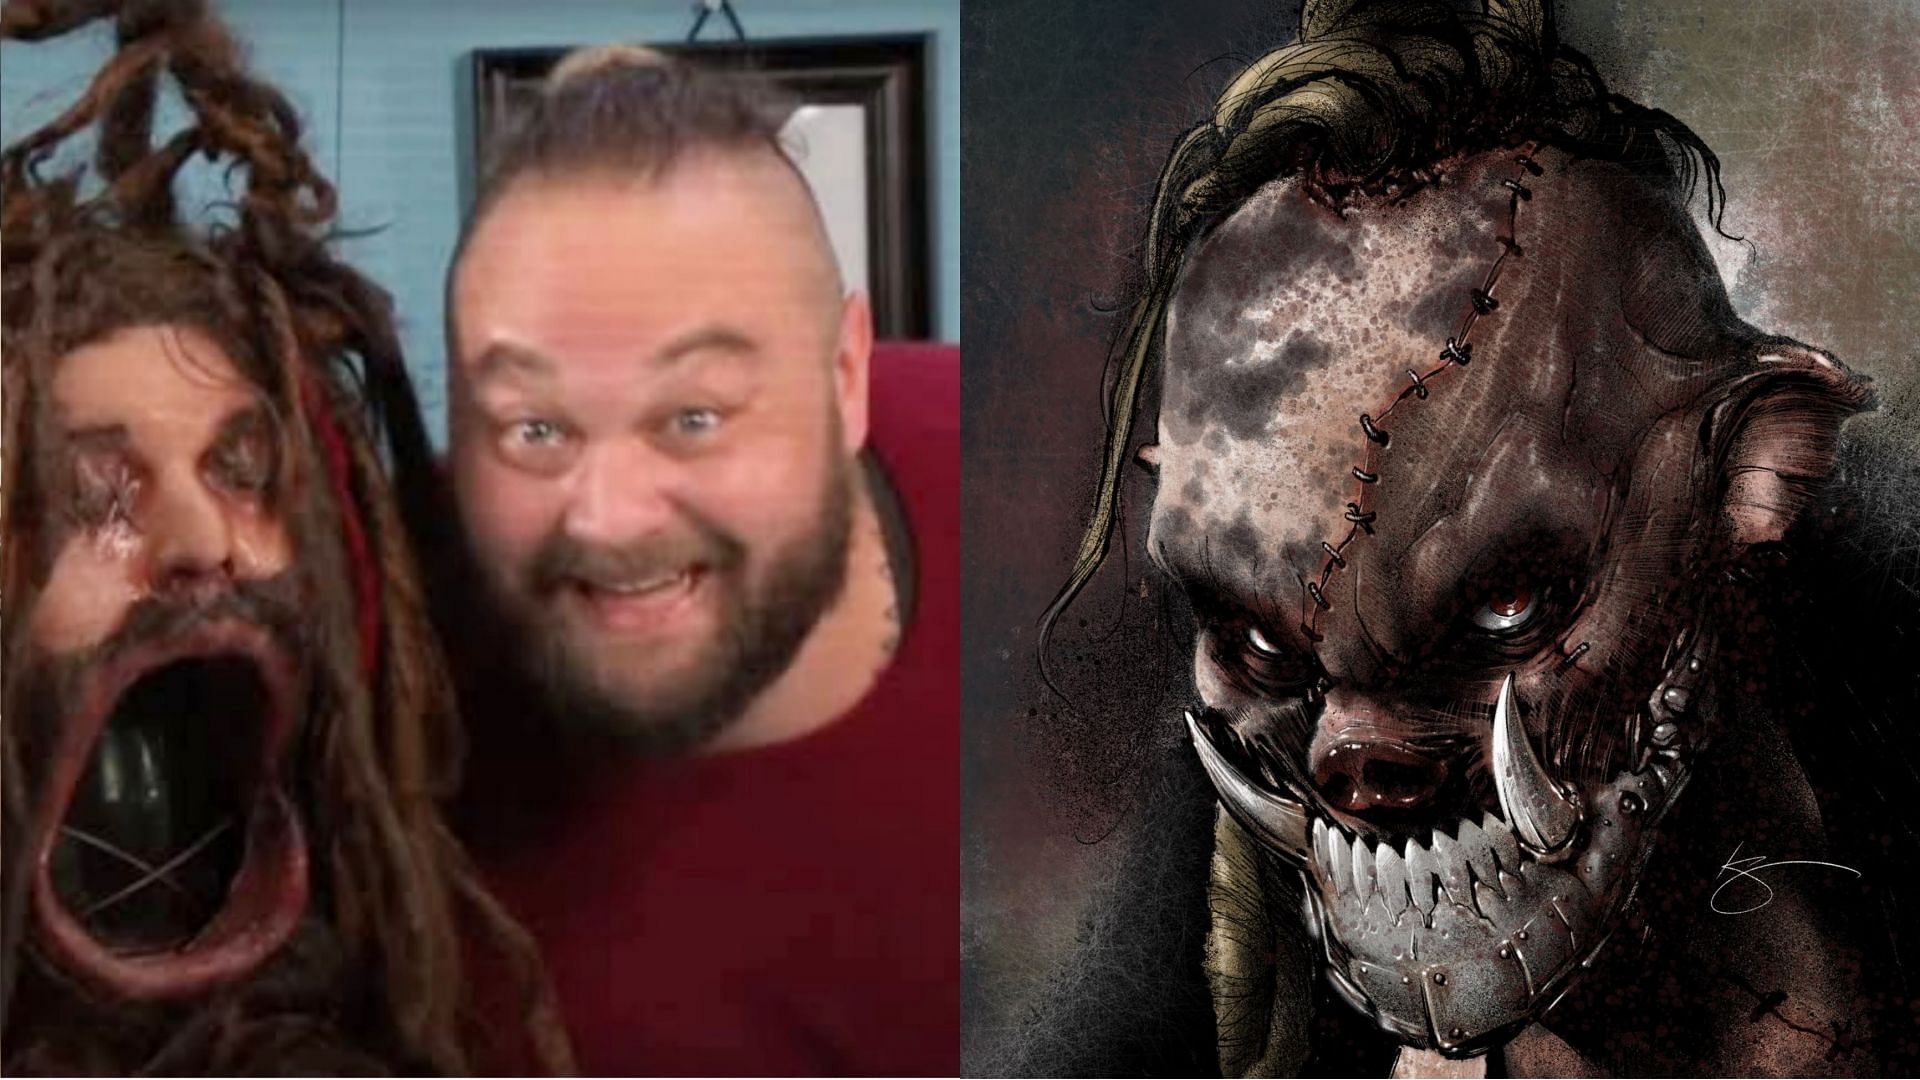 Bray Wyatt in the Firefly Fun House (left); Concept art by Kyle A. Scarborough (right)